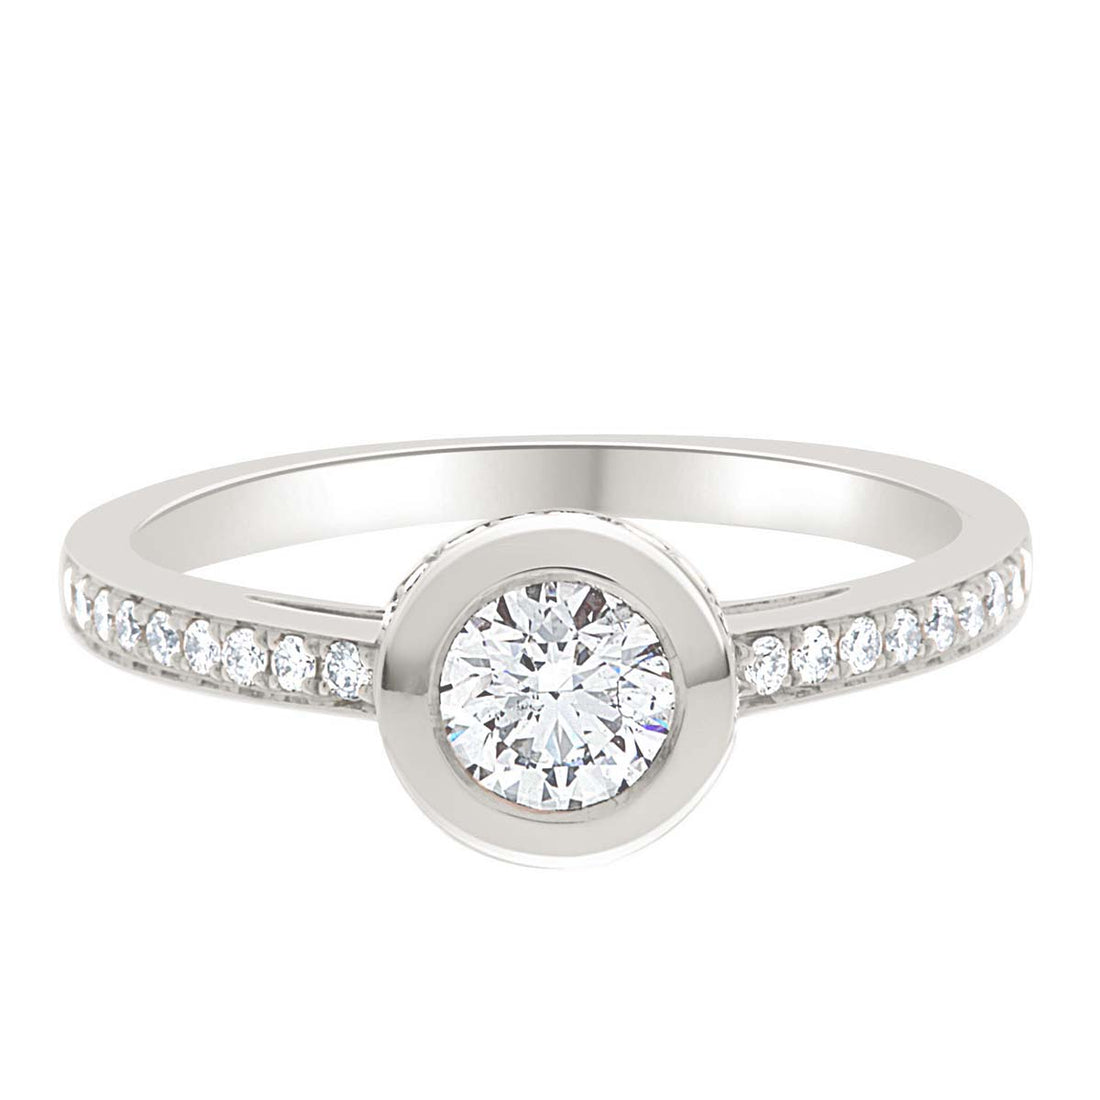 Bezel Engagement Ring made of white gold and diamonds